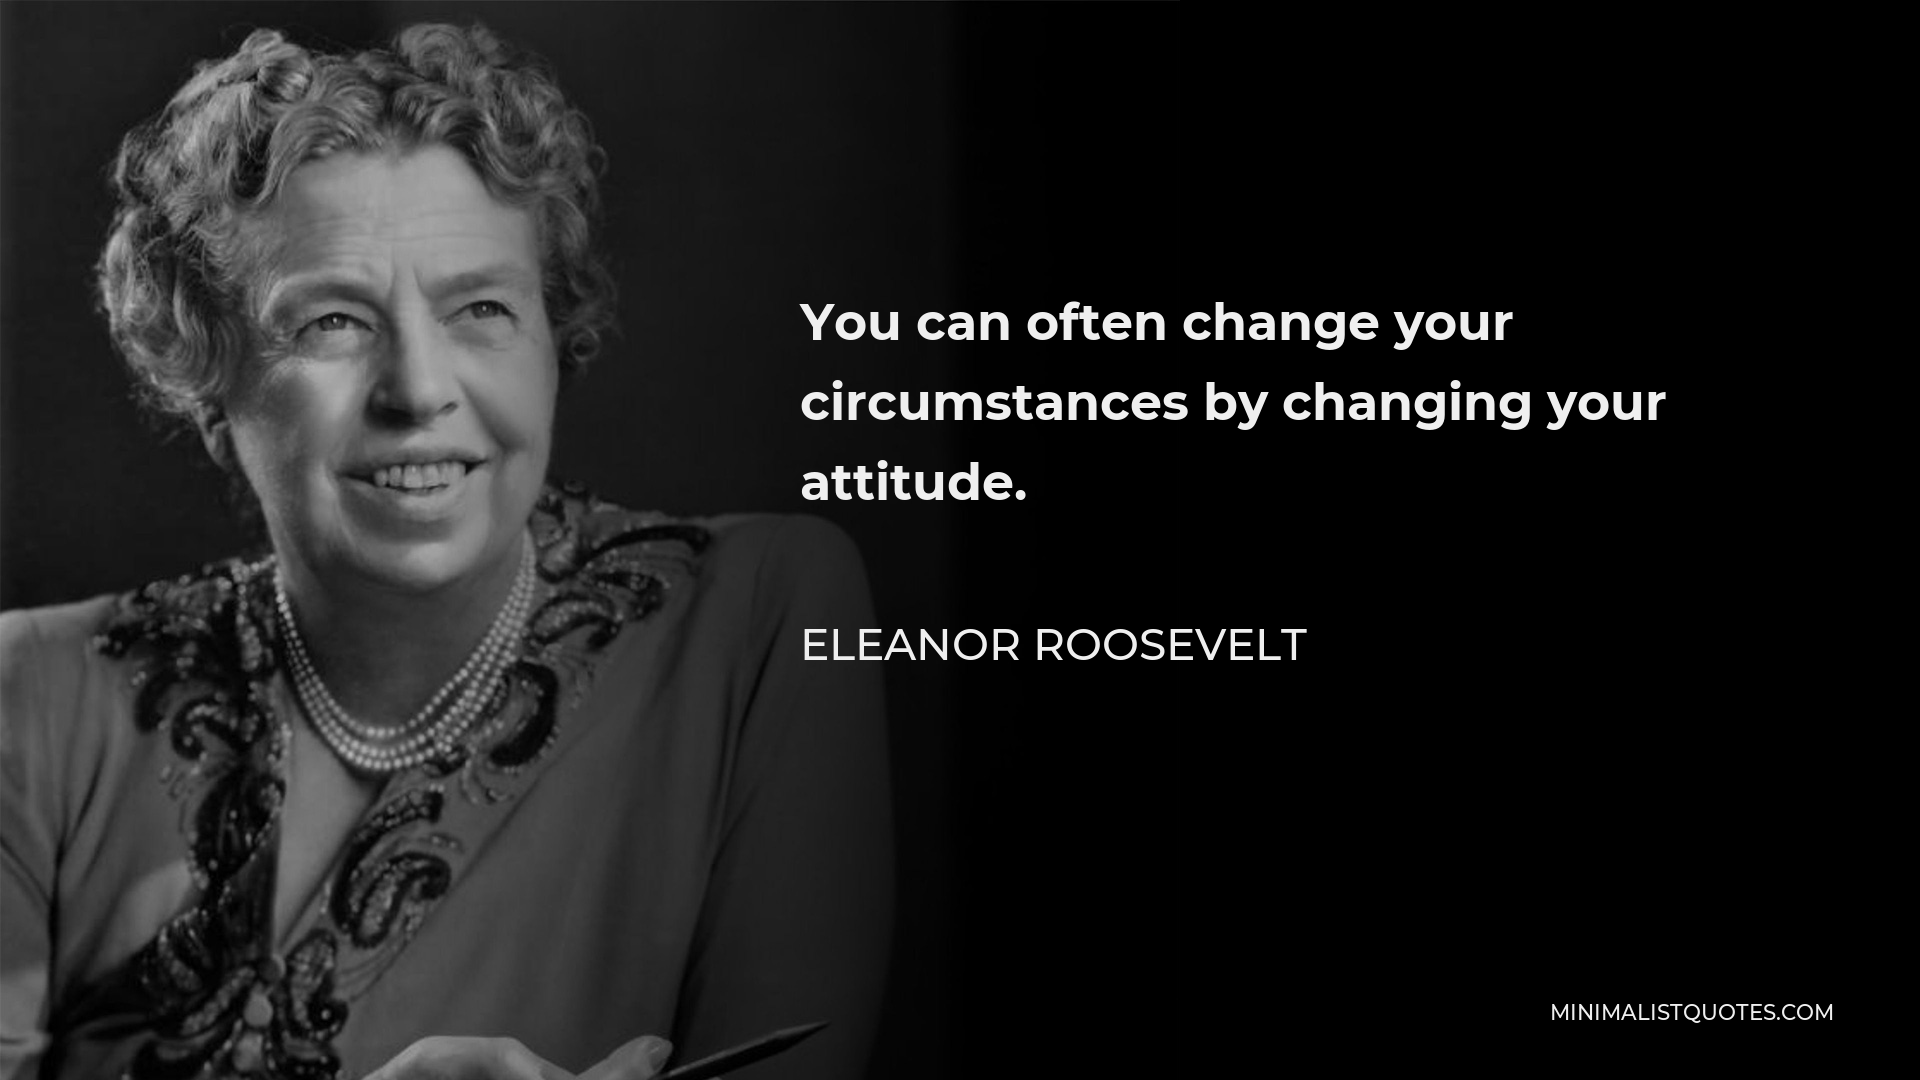 Eleanor Roosevelt Quote - You can often change your circumstances by changing your attitude.